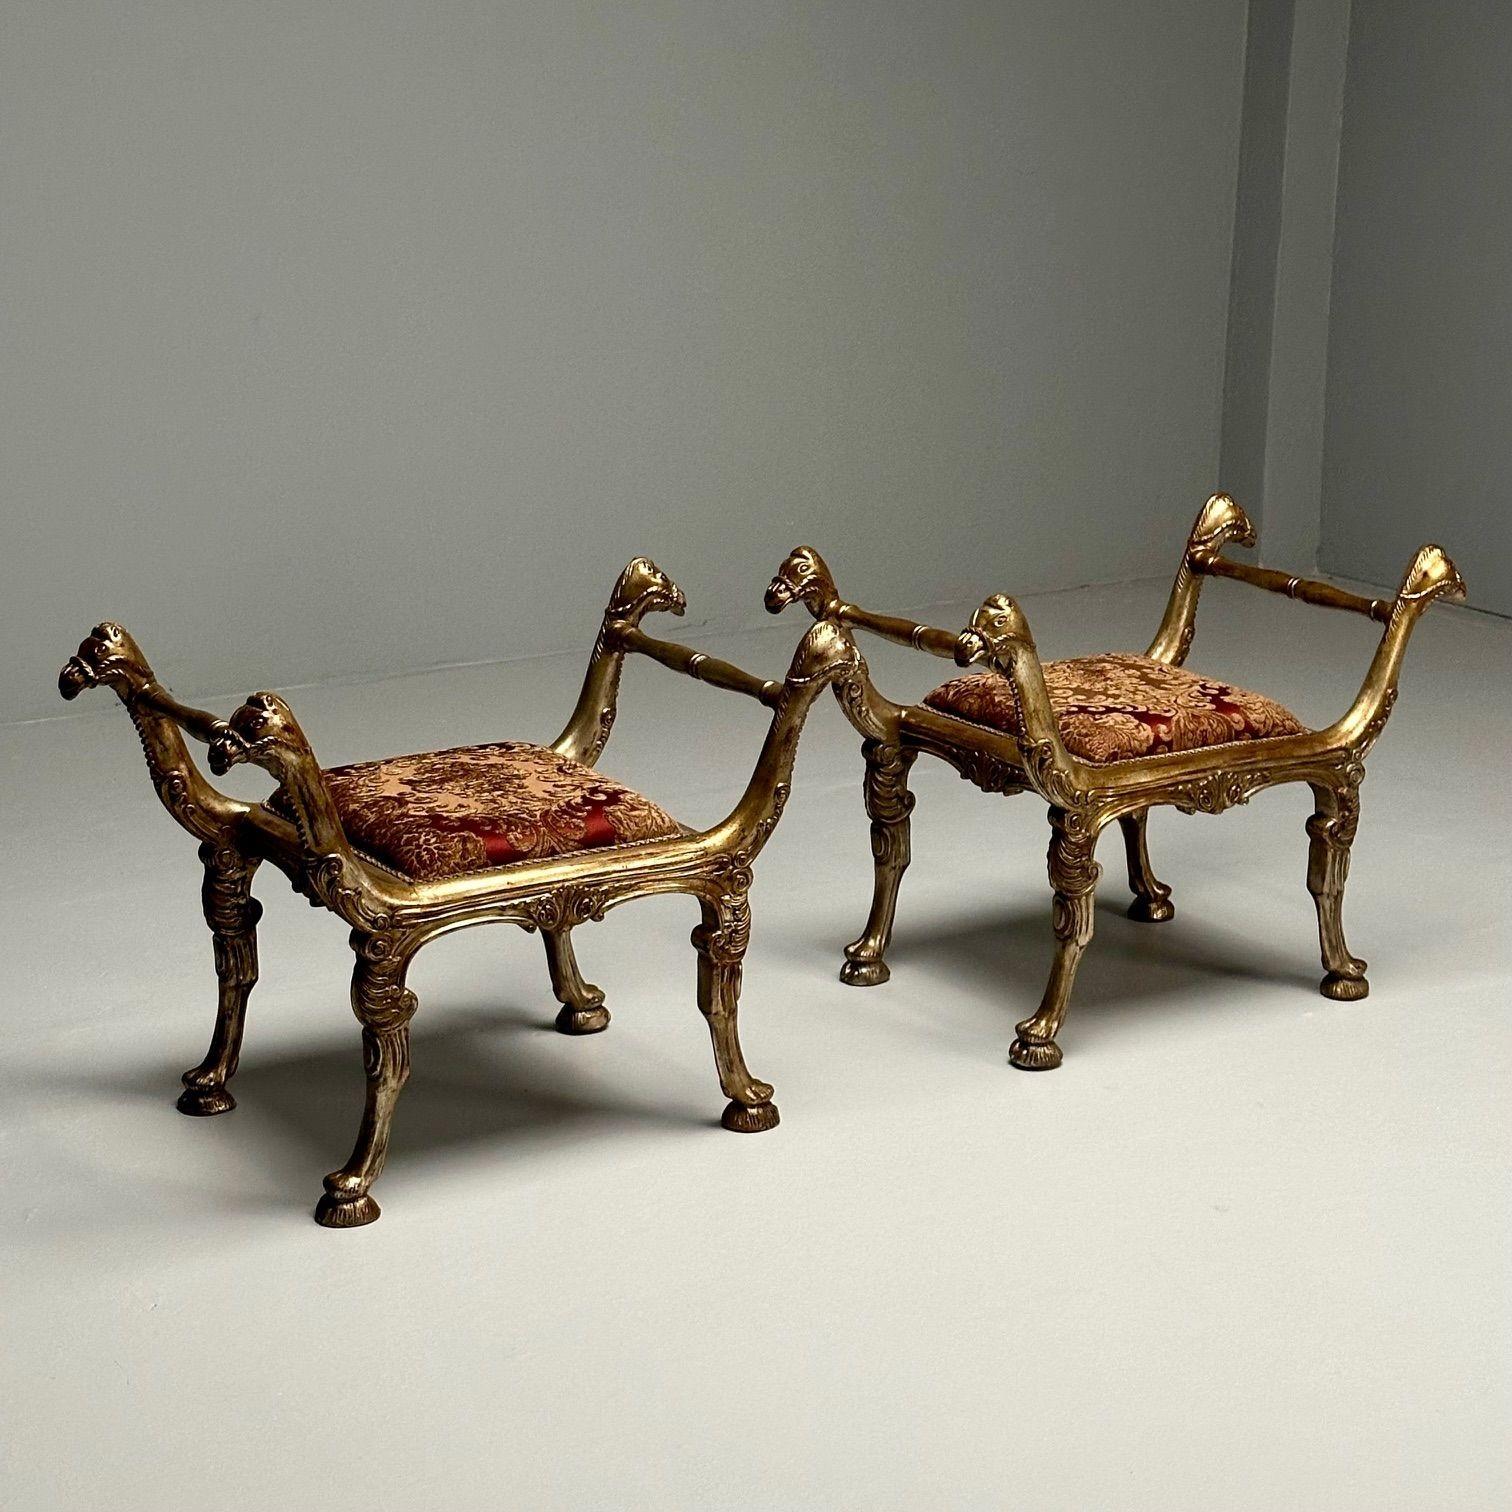 European Italian Neoclassical Style, Curule Benches, Giltwood, Fabric, Camel Motif, 1970s For Sale